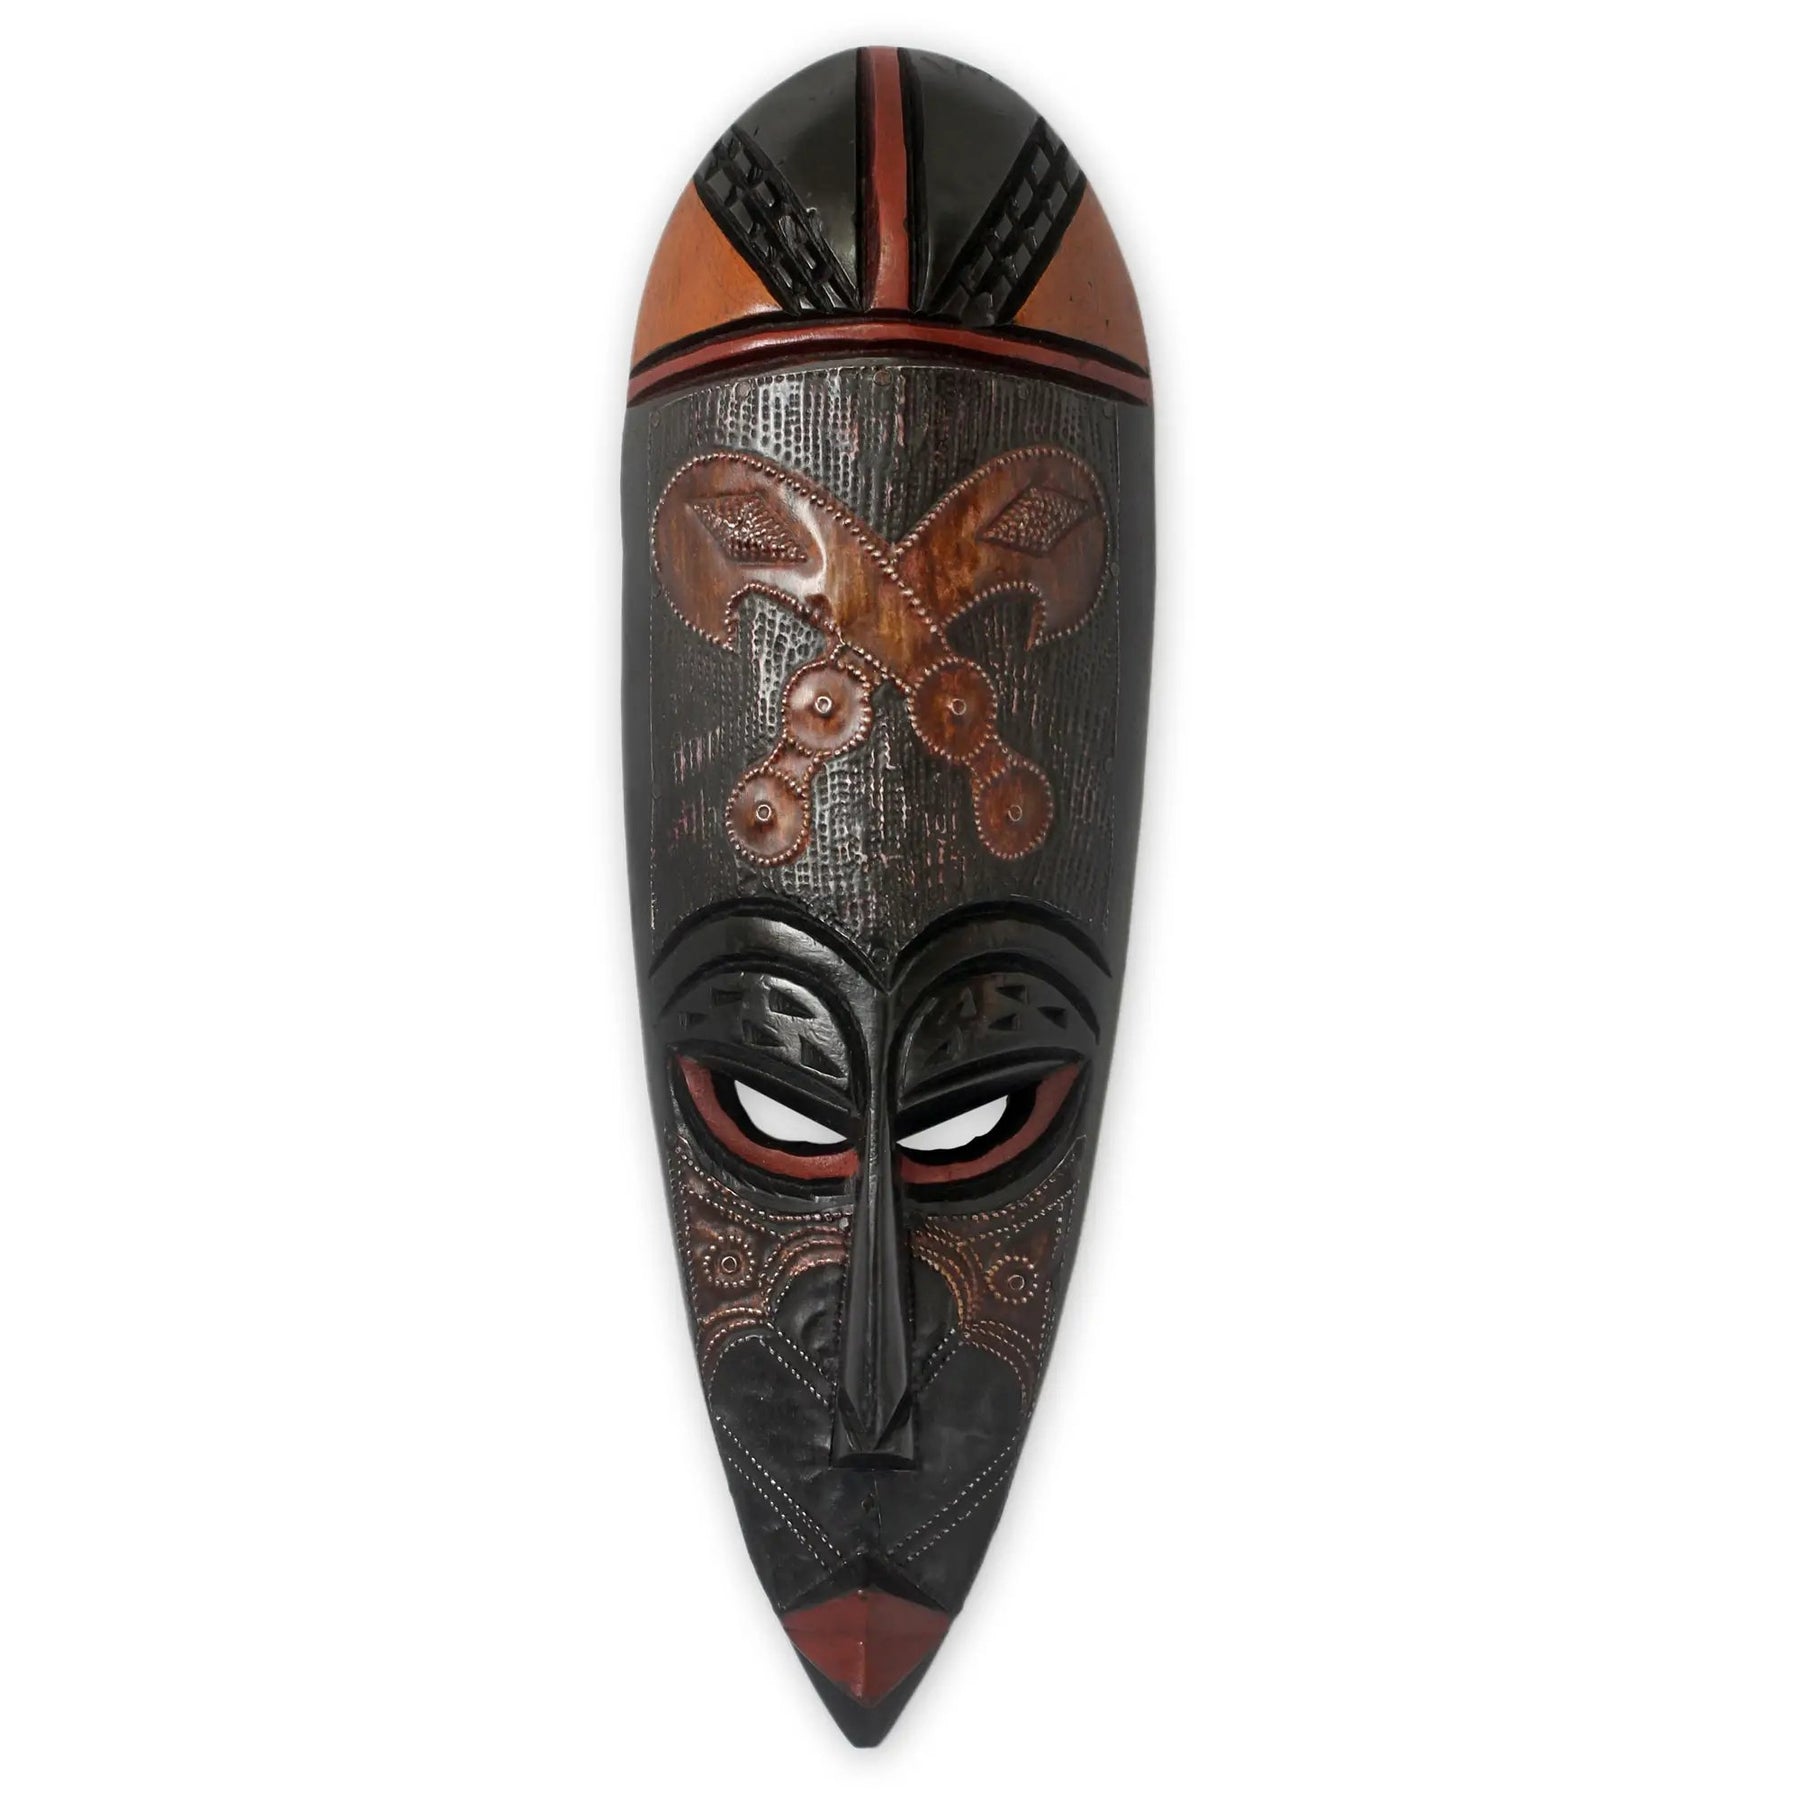 1 of 3: Swords of War: Authentic Hand Made West African Mask by Theophilus Sackey